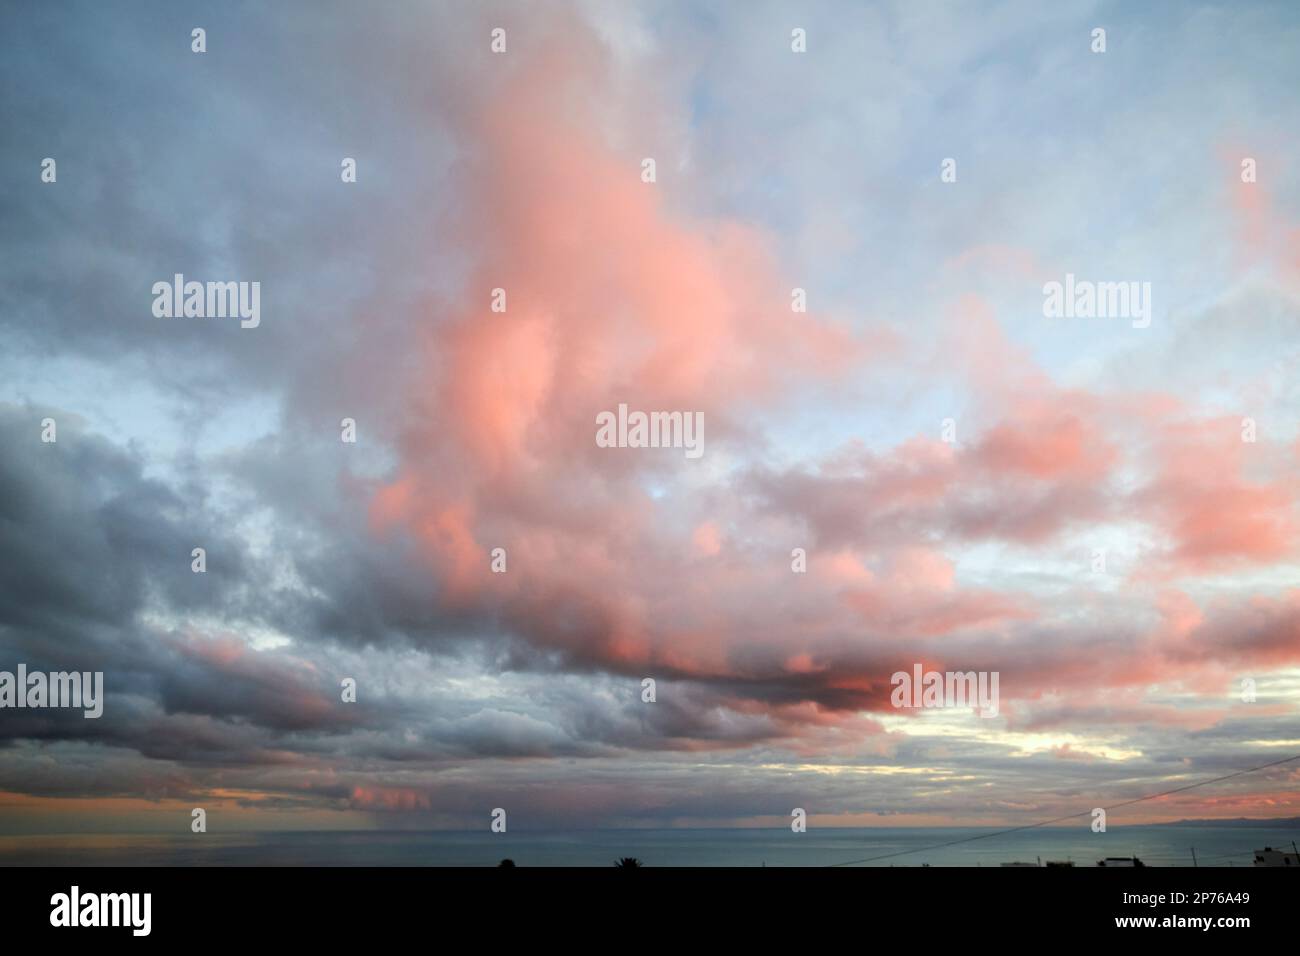 cloudy sky glowing pink and red due to setting sun over the sea Lanzarote, Canary Islands, Spain Stock Photo